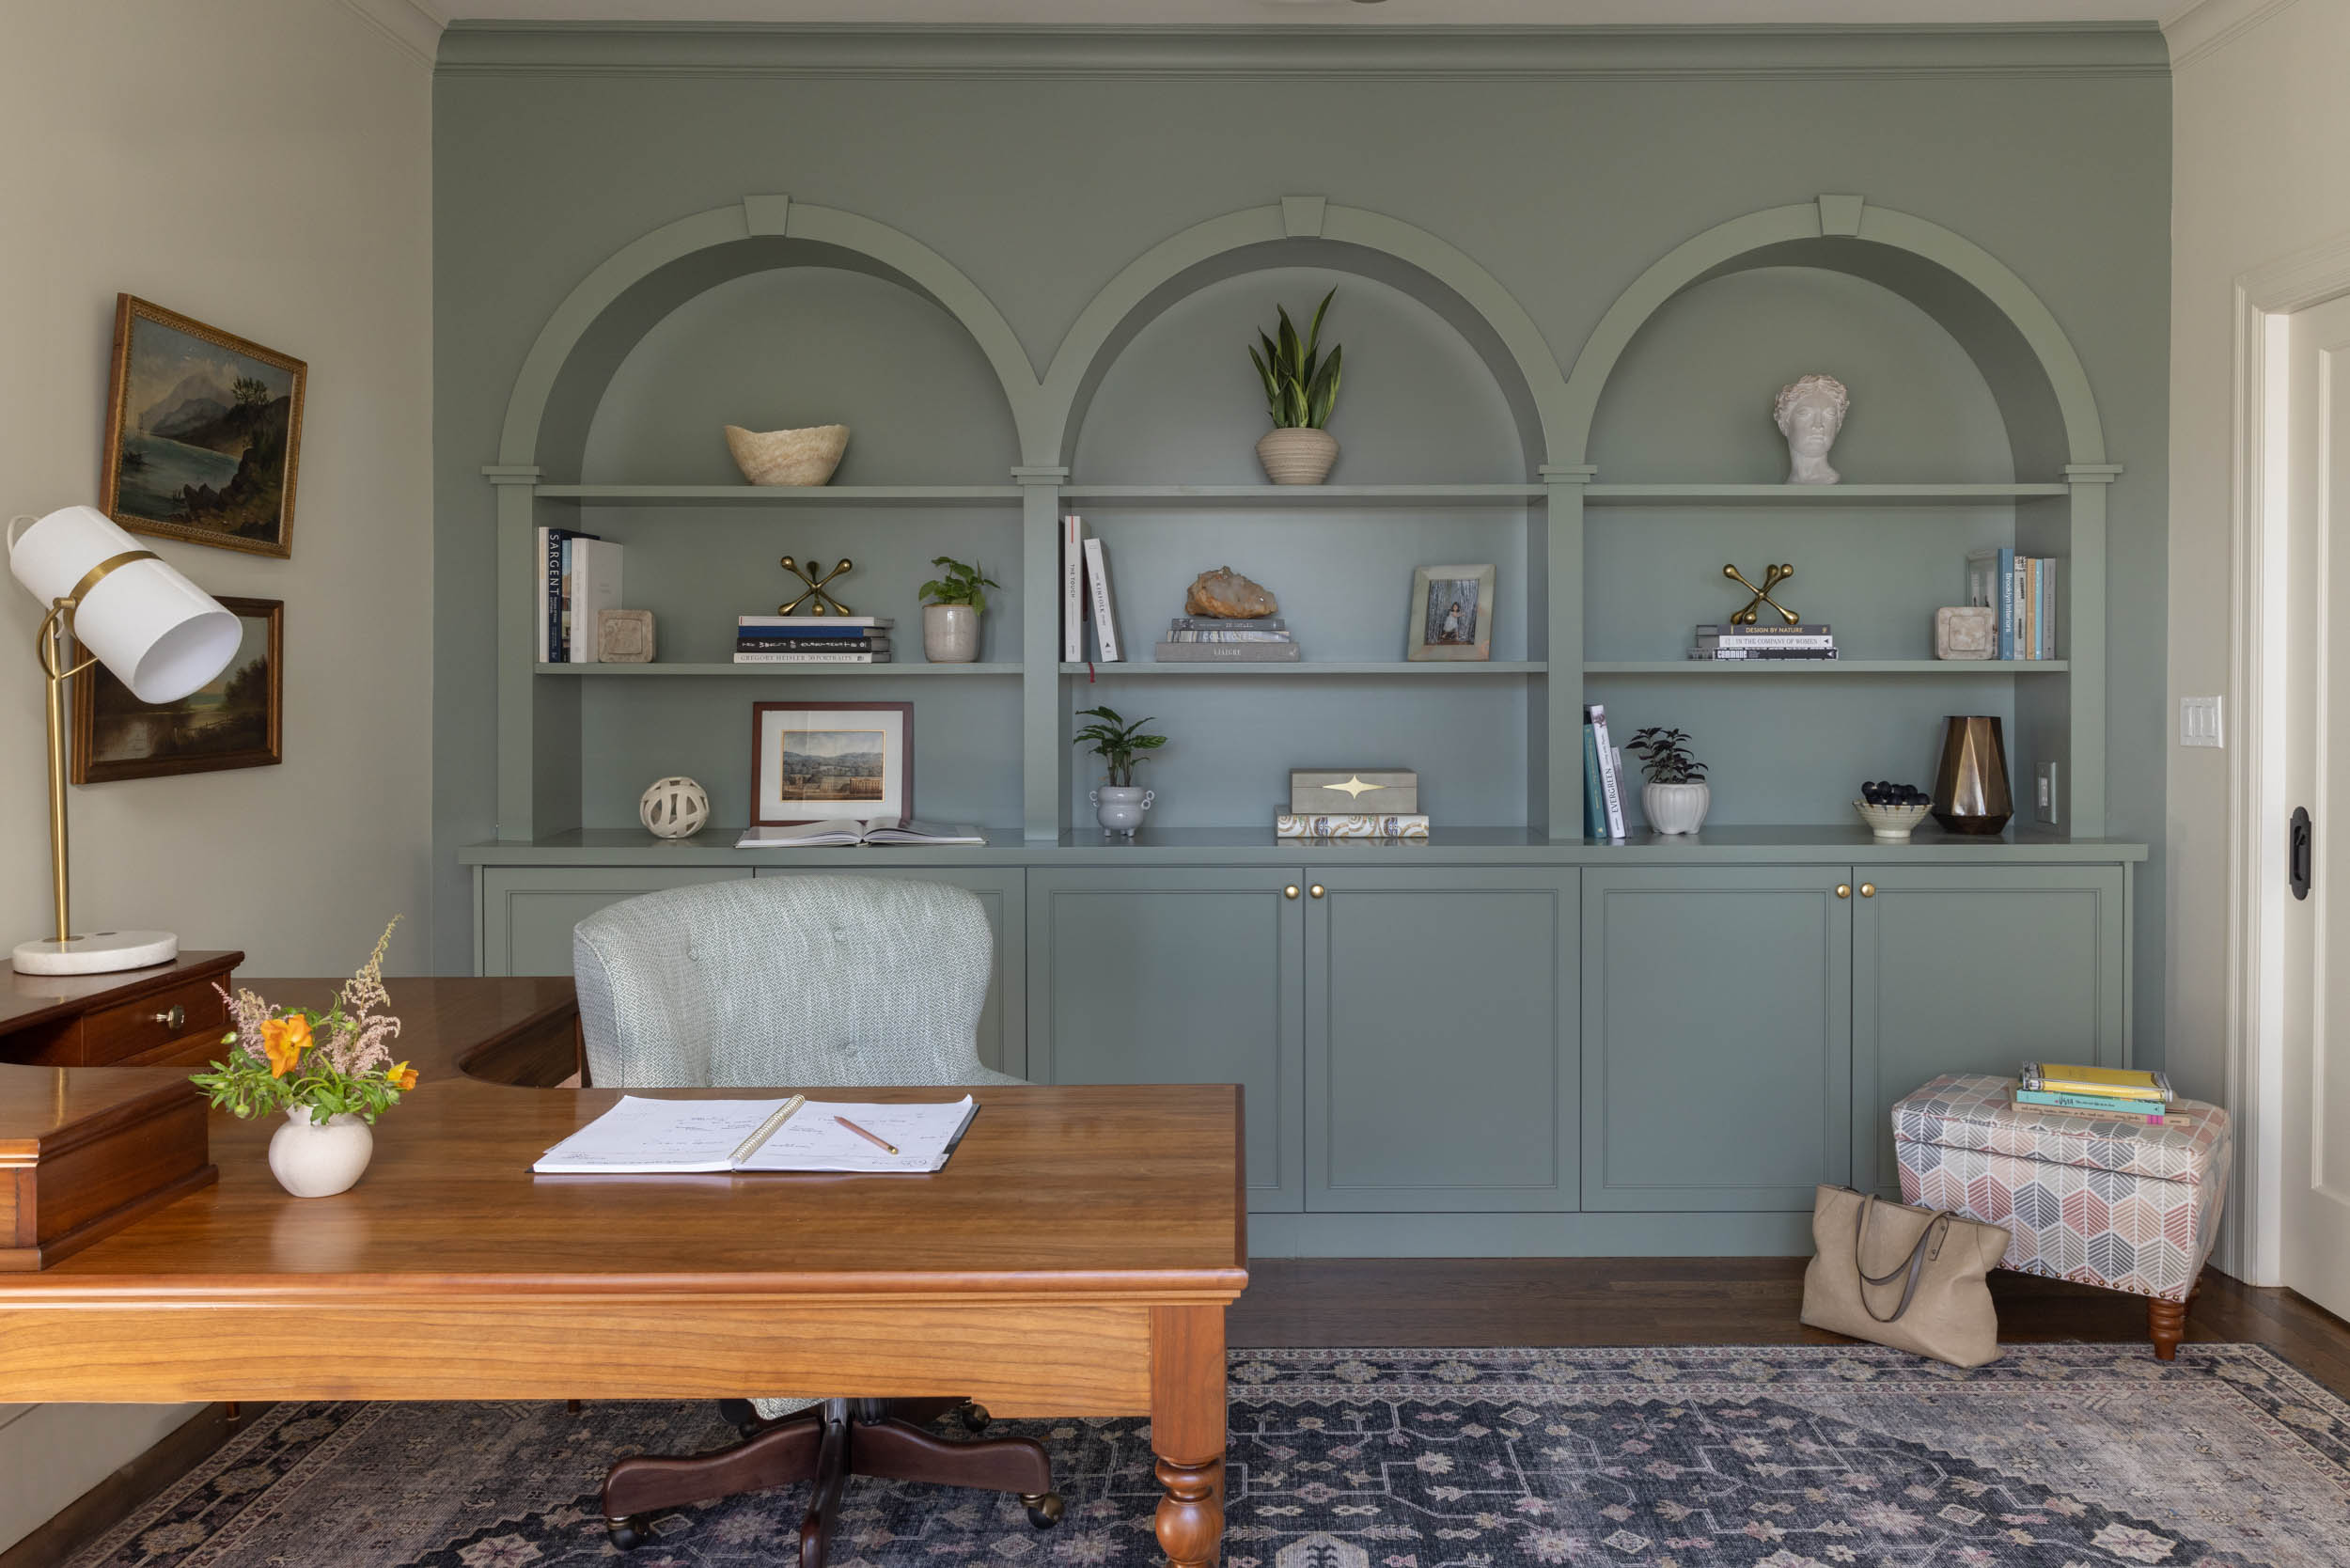 Sonoma County interior designer project image of an office with arched custom built-in cabinetry